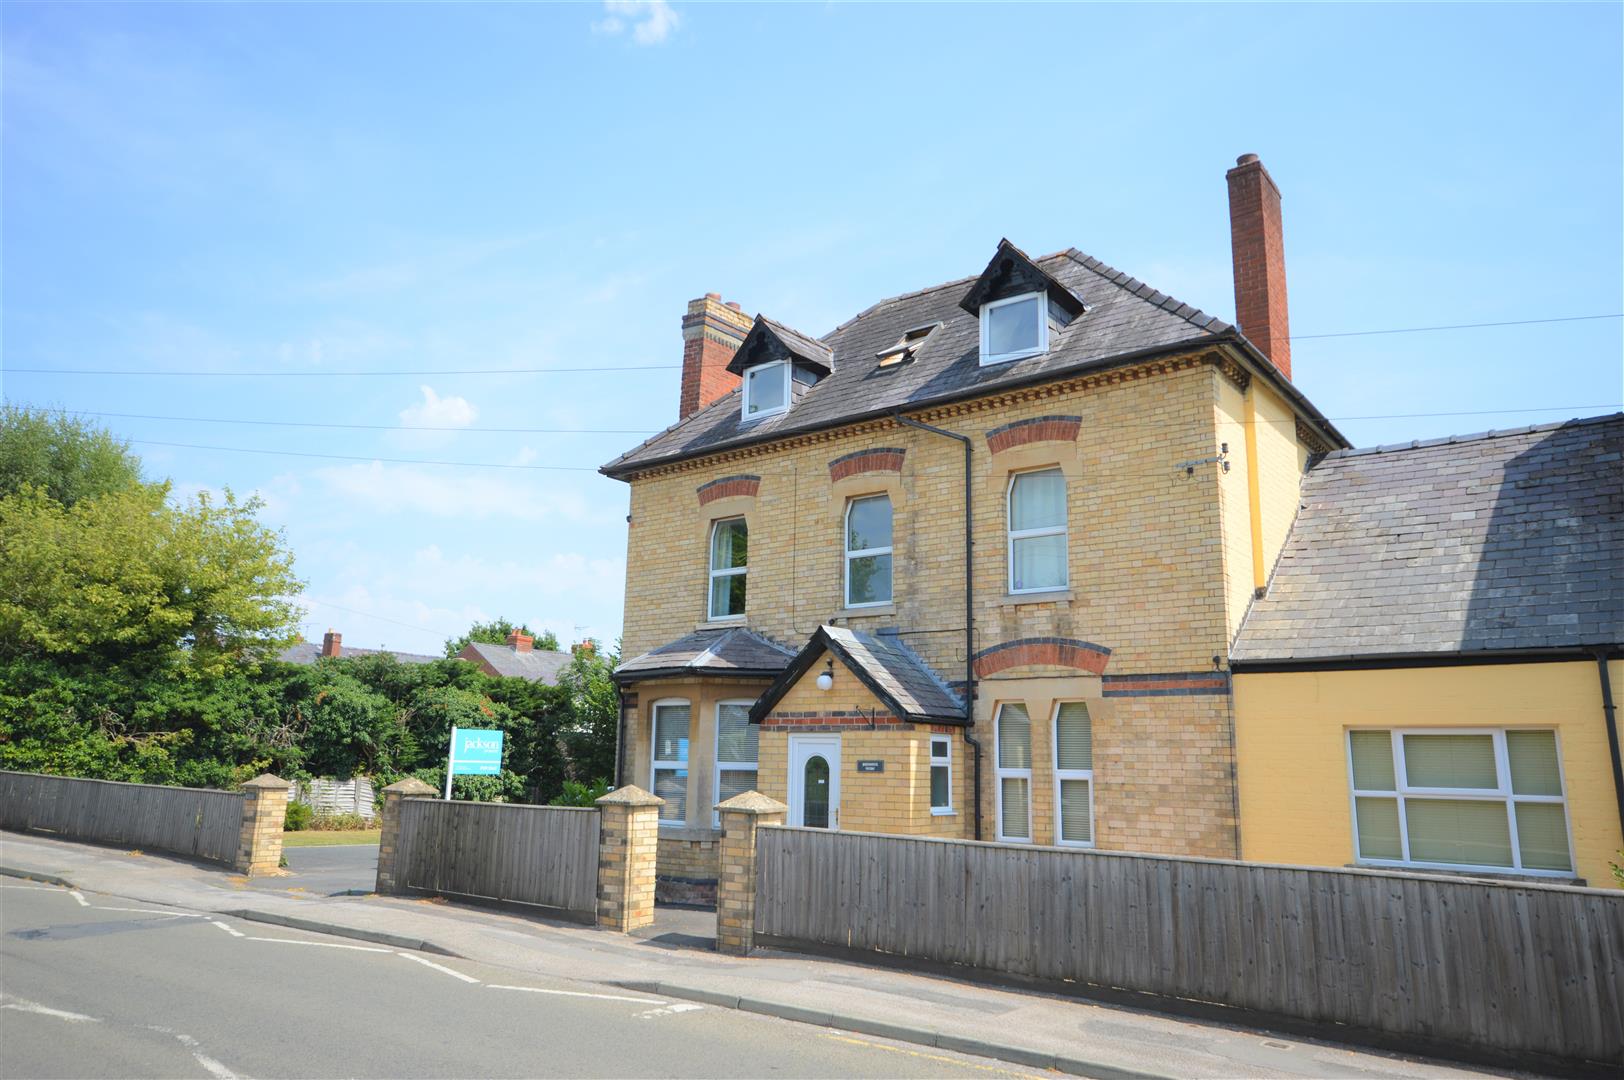 6 bed town house for sale in Leominster 1